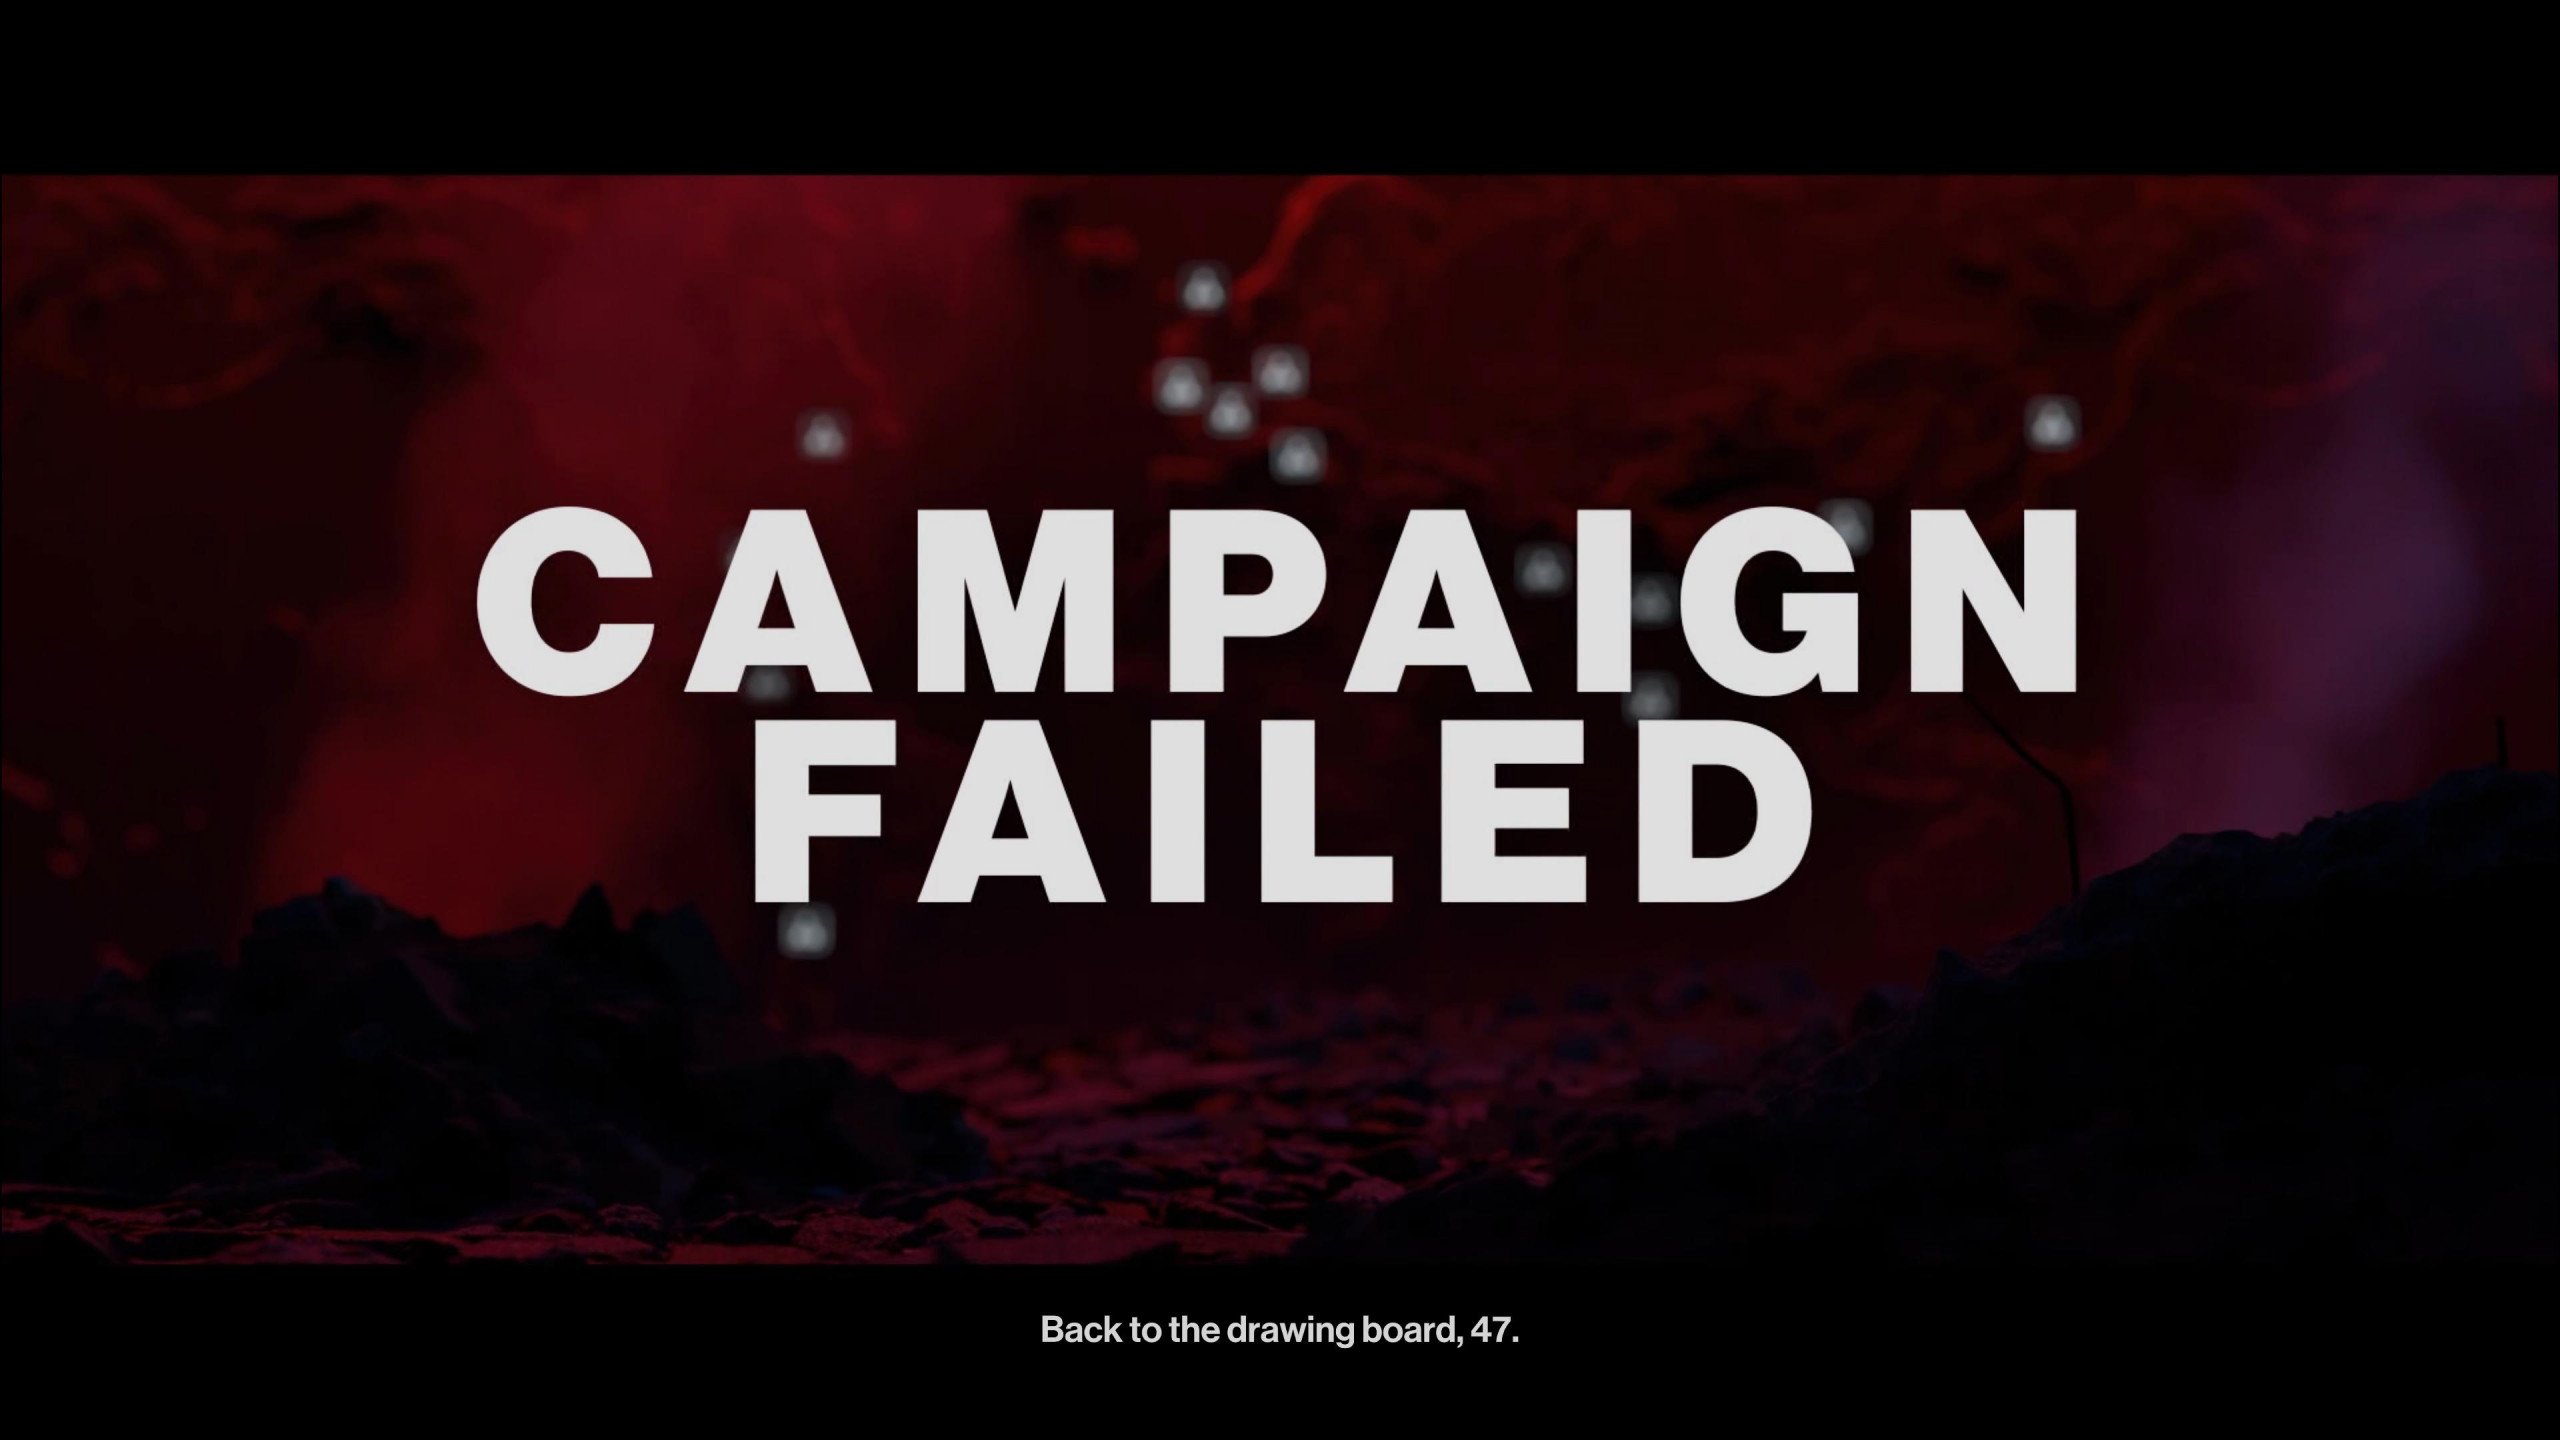 The failure screen for Hitman Freelancer. It features a red background with with text reading "CAMPAIGN FAILED"